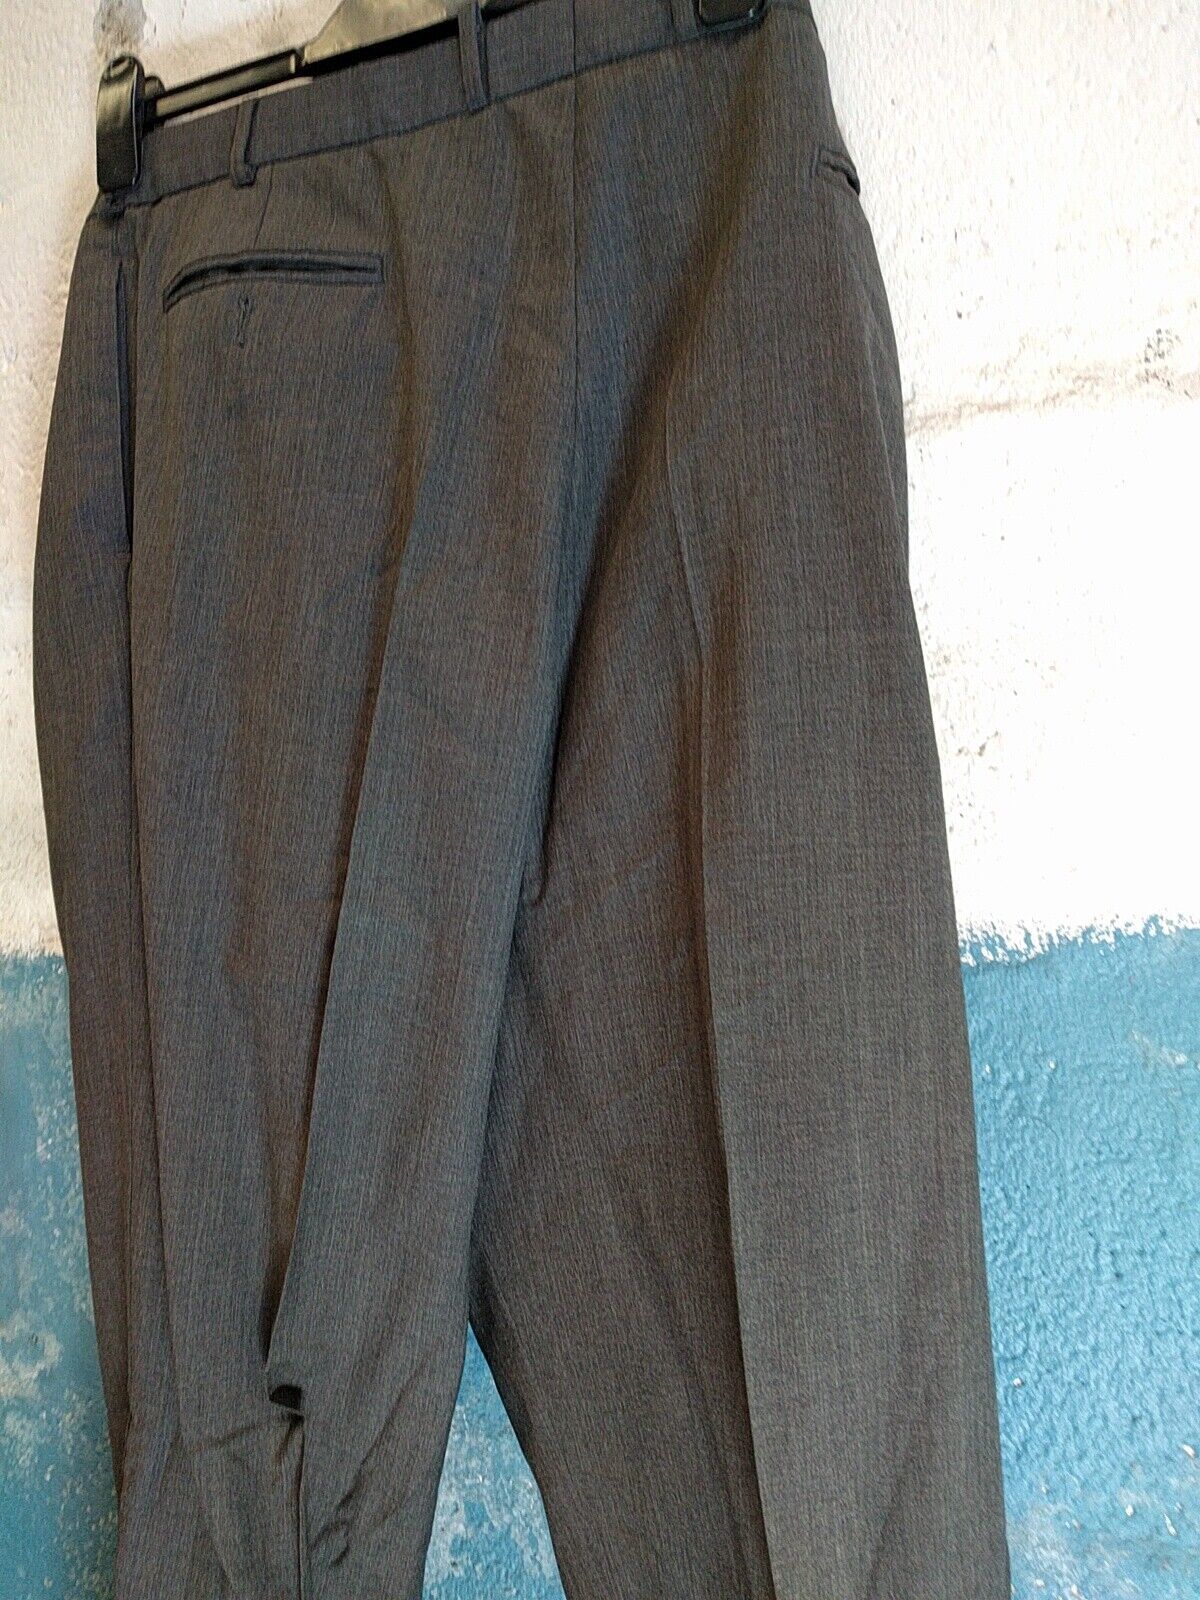 Primary image for Means Trousers - M&S Size w38/L31 Wool Grey Trousers